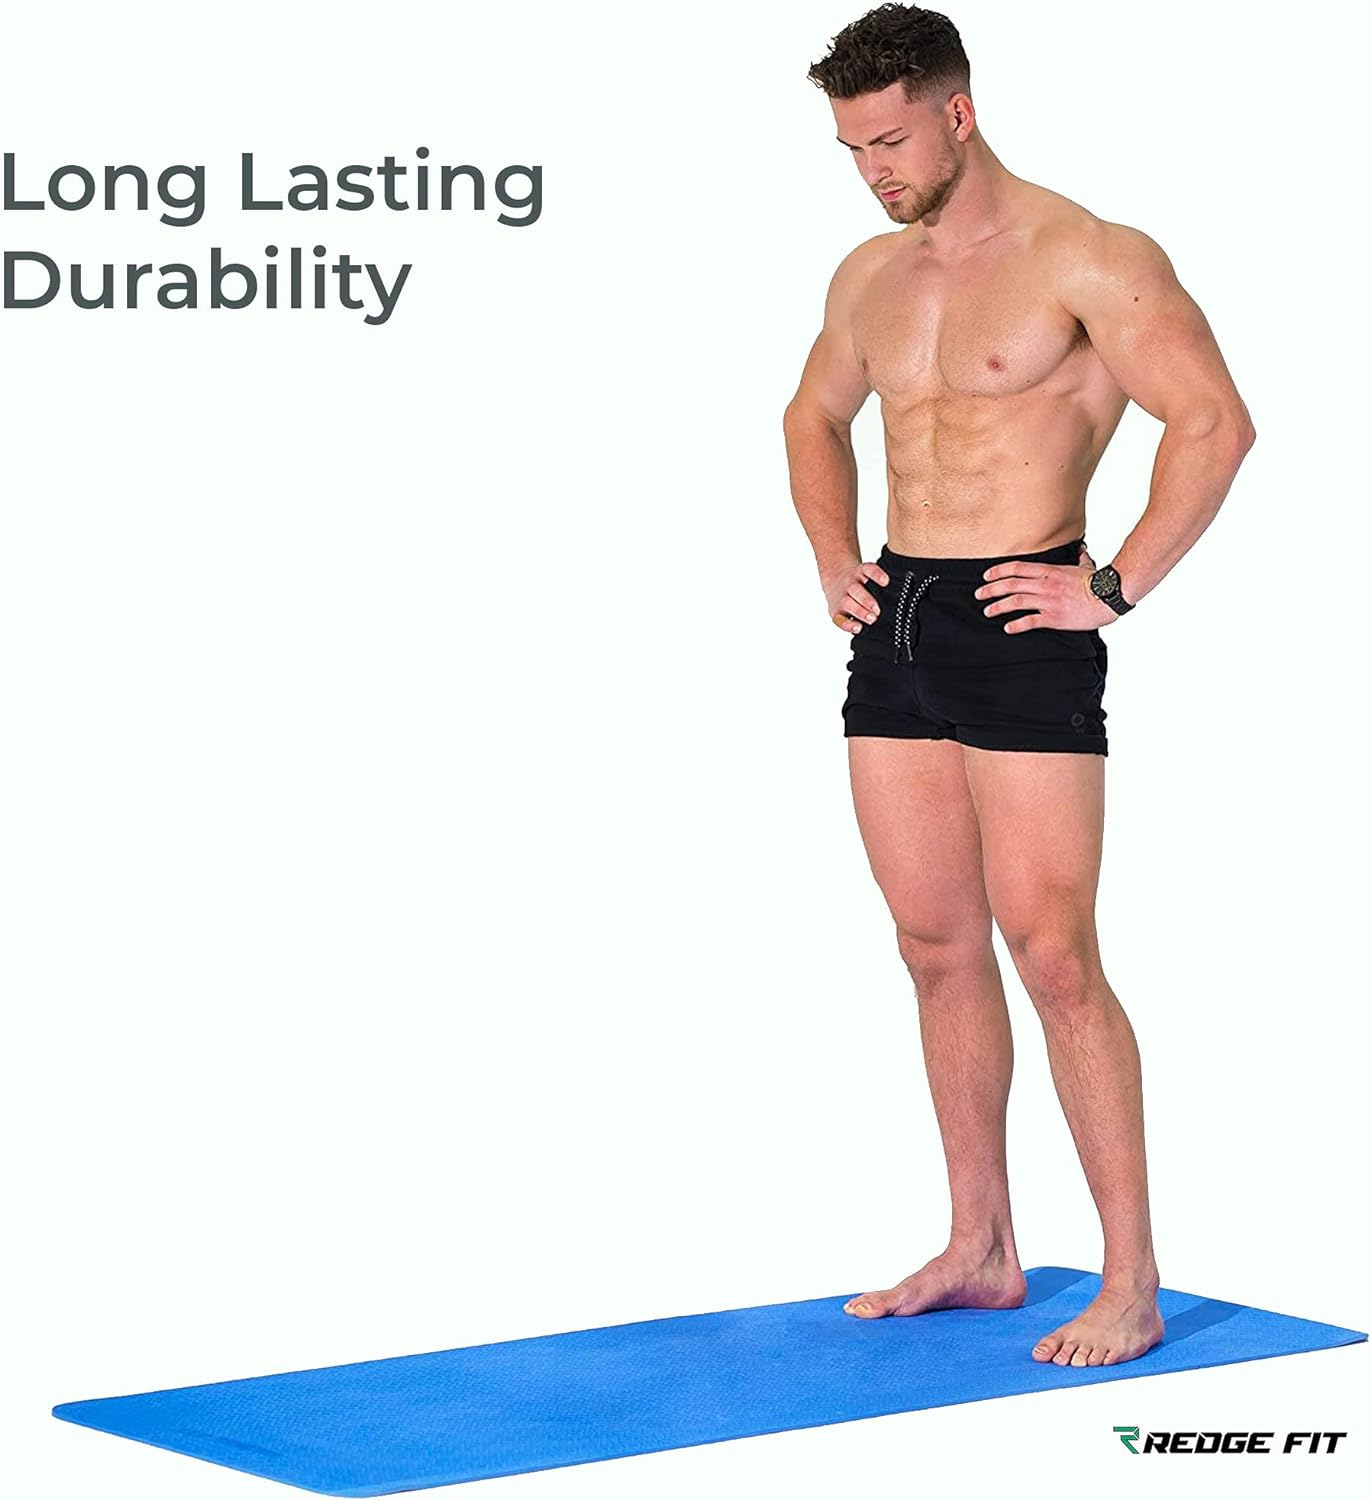 ™ Double Sided Workout Mat with Carrying Straps Premium TPE Eco Friendly Double Layer Material Multifunctional Use Yoga, Pilates, Fitness, Workout, Home Gym Floor Exercise